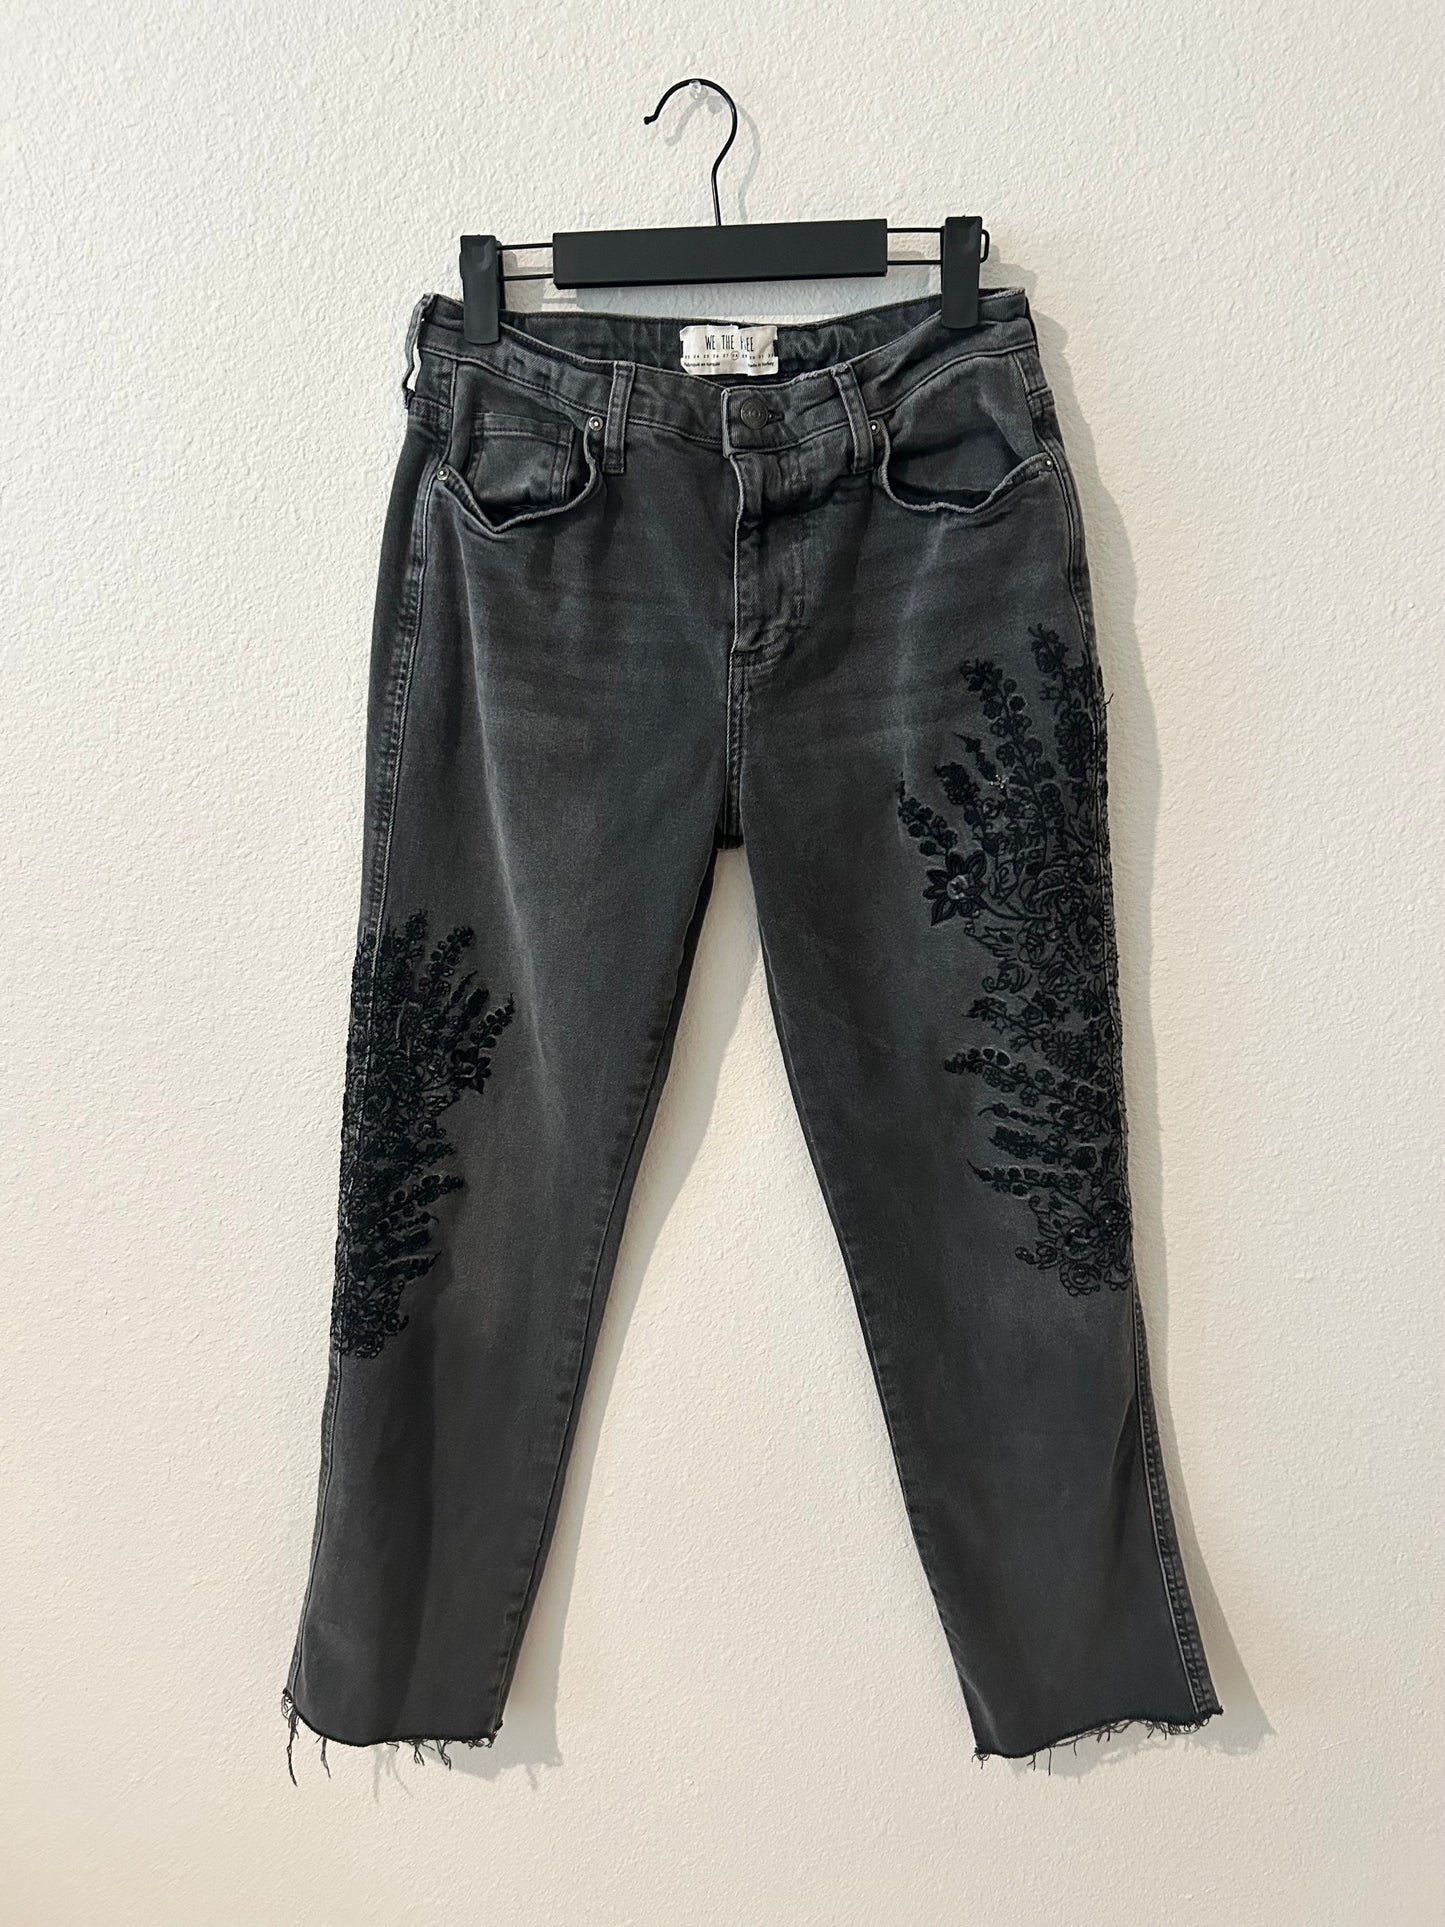 Free People Floral Embroidered Jeans (6)